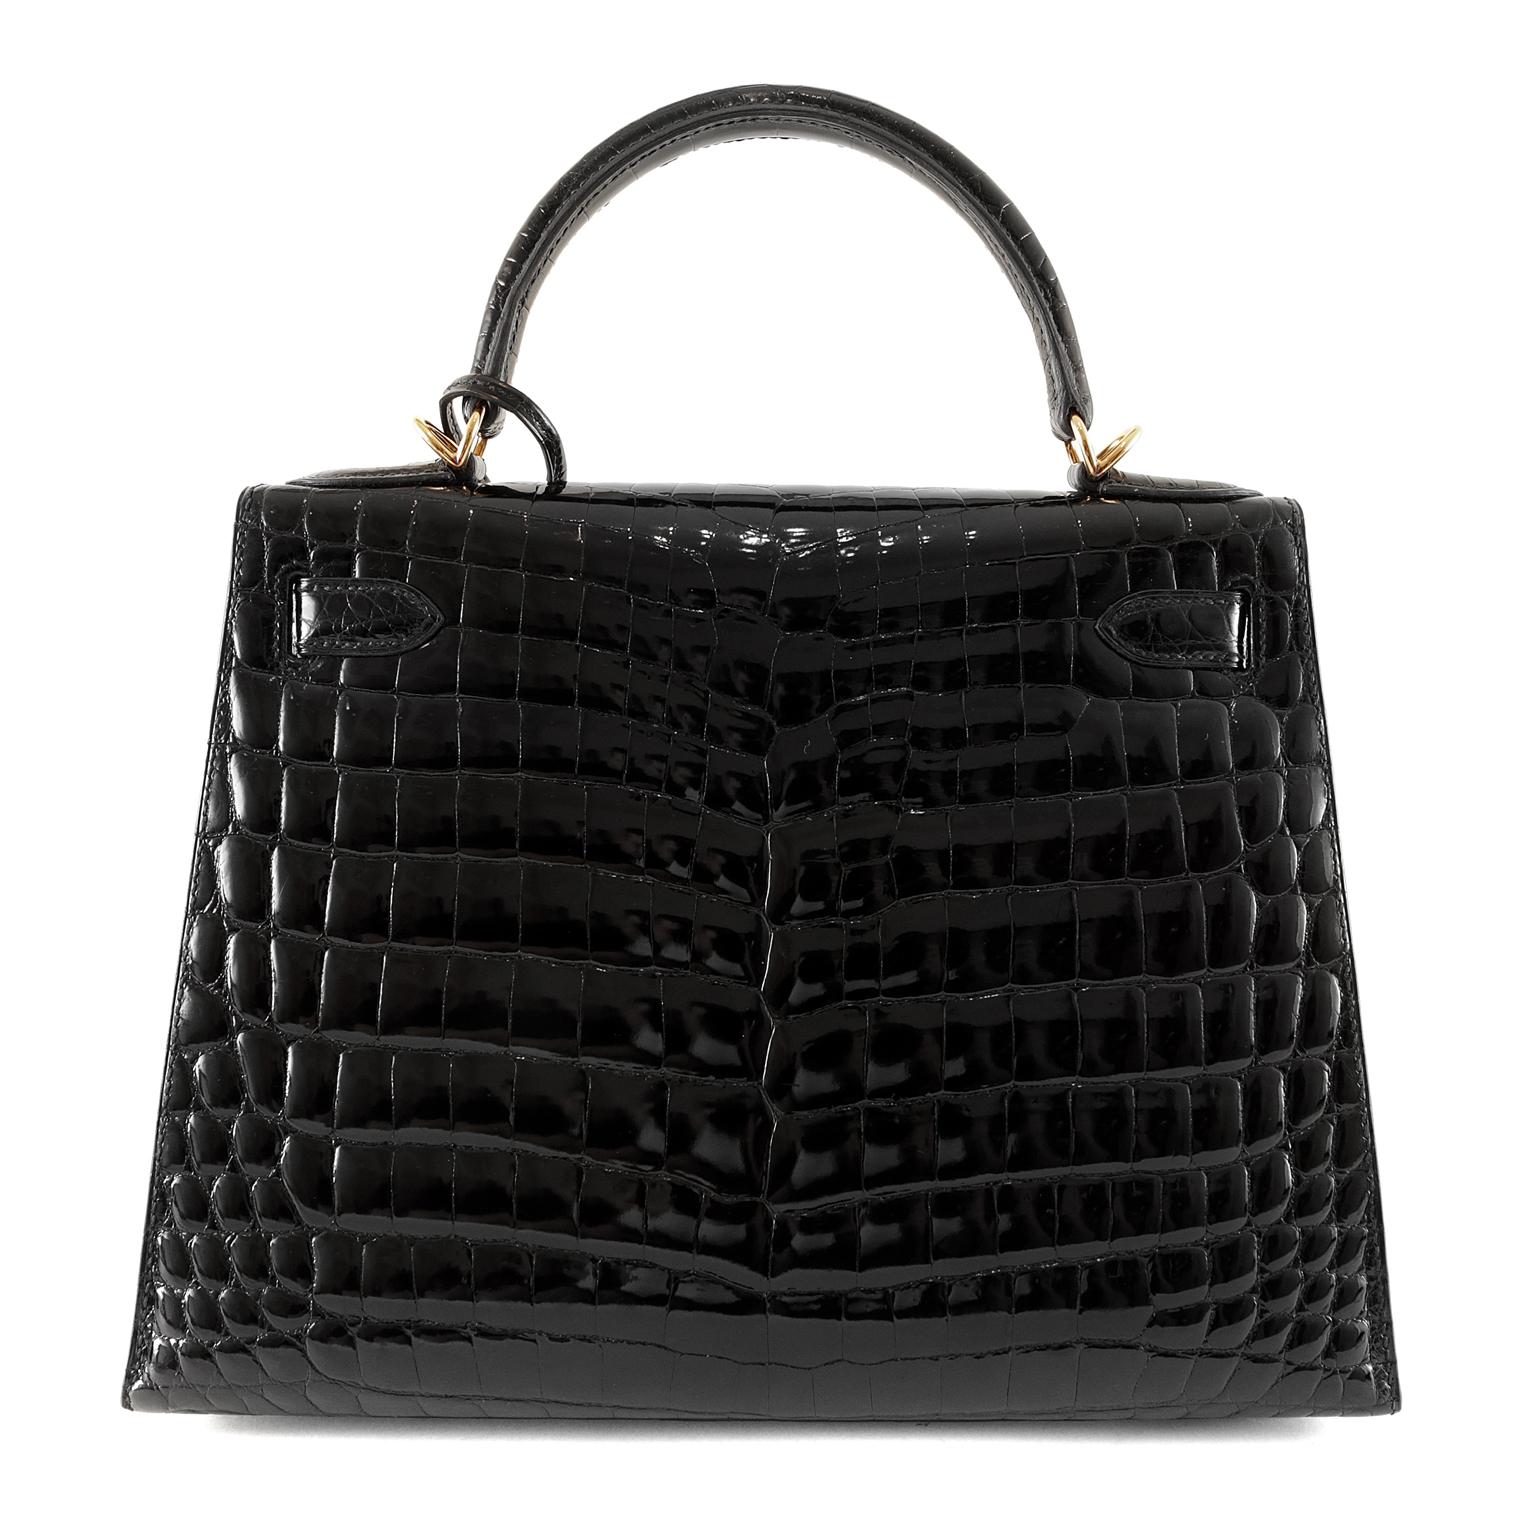 Hermès 28 cm Black Crocodile Kelly- Never Carried, as new condition
  Hermès bags are considered the ultimate luxury item the world over.  Hand stitched by skilled craftsmen, wait lists of a year or more are commonplace for the leather versions.  A